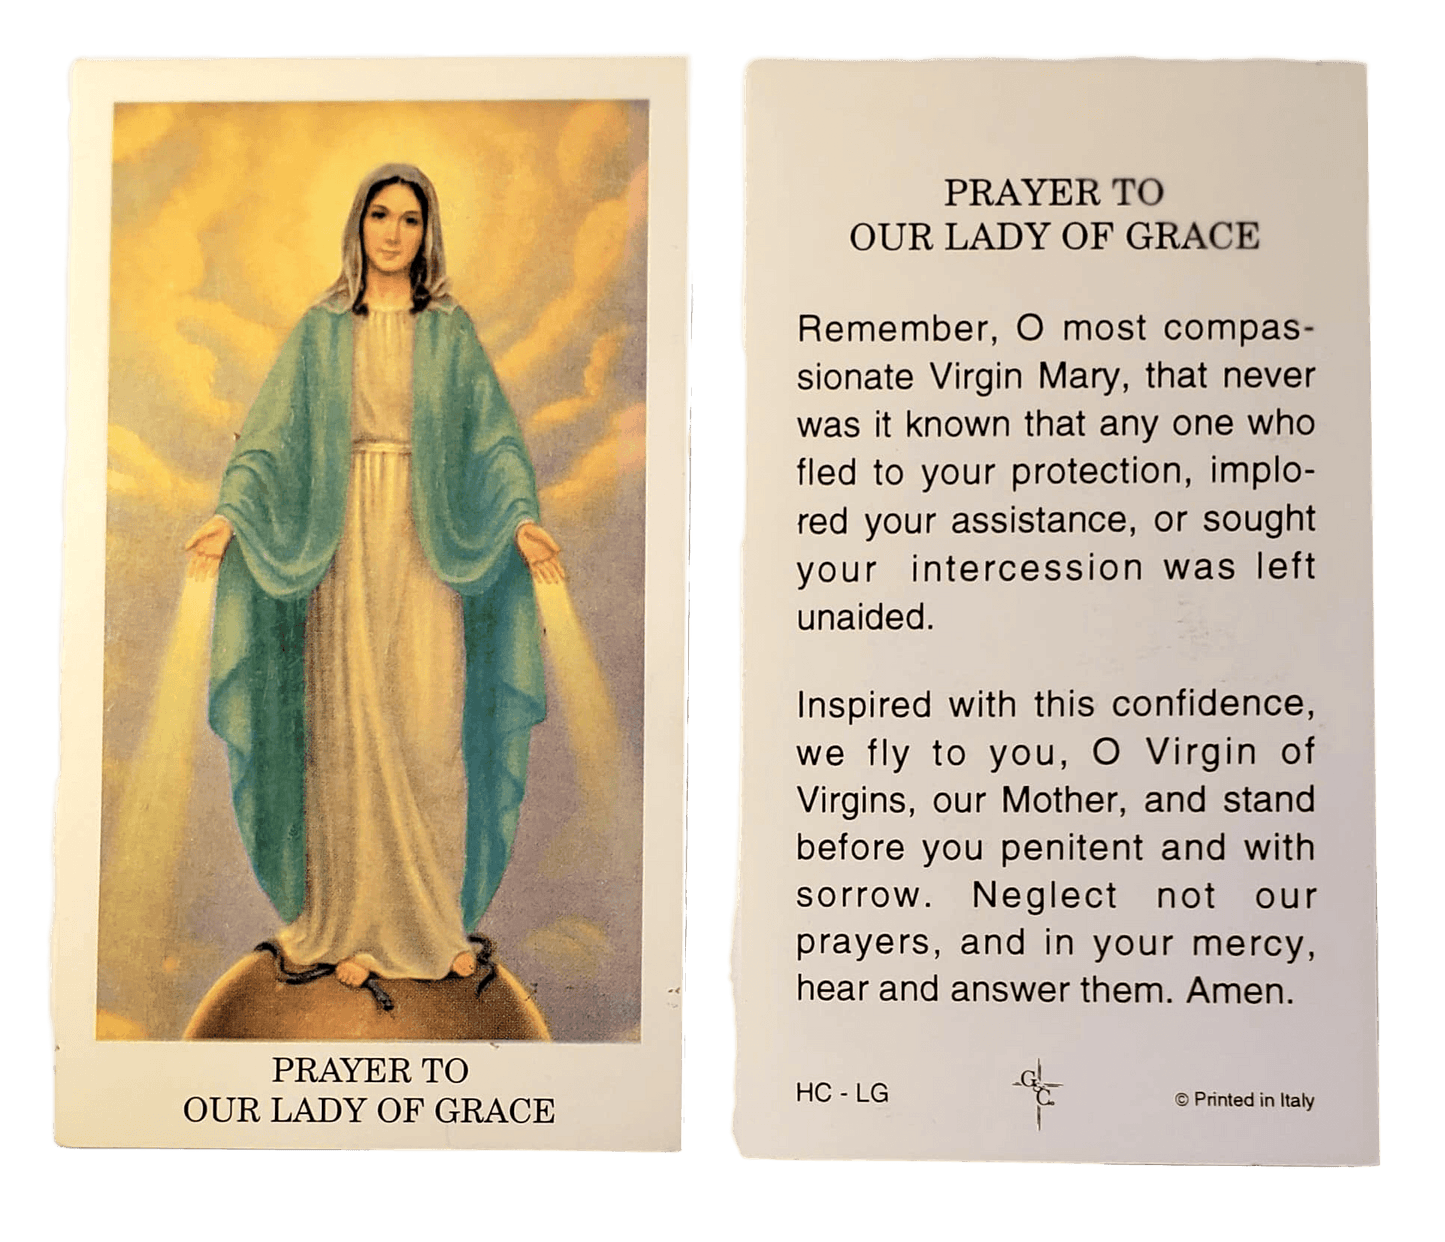 Prayer Card Prayer To Our Lady Of Grace No Laminated HC- LG - Ysleta Mission Gift Shop- VOTED El Paso's Best Gift Shop